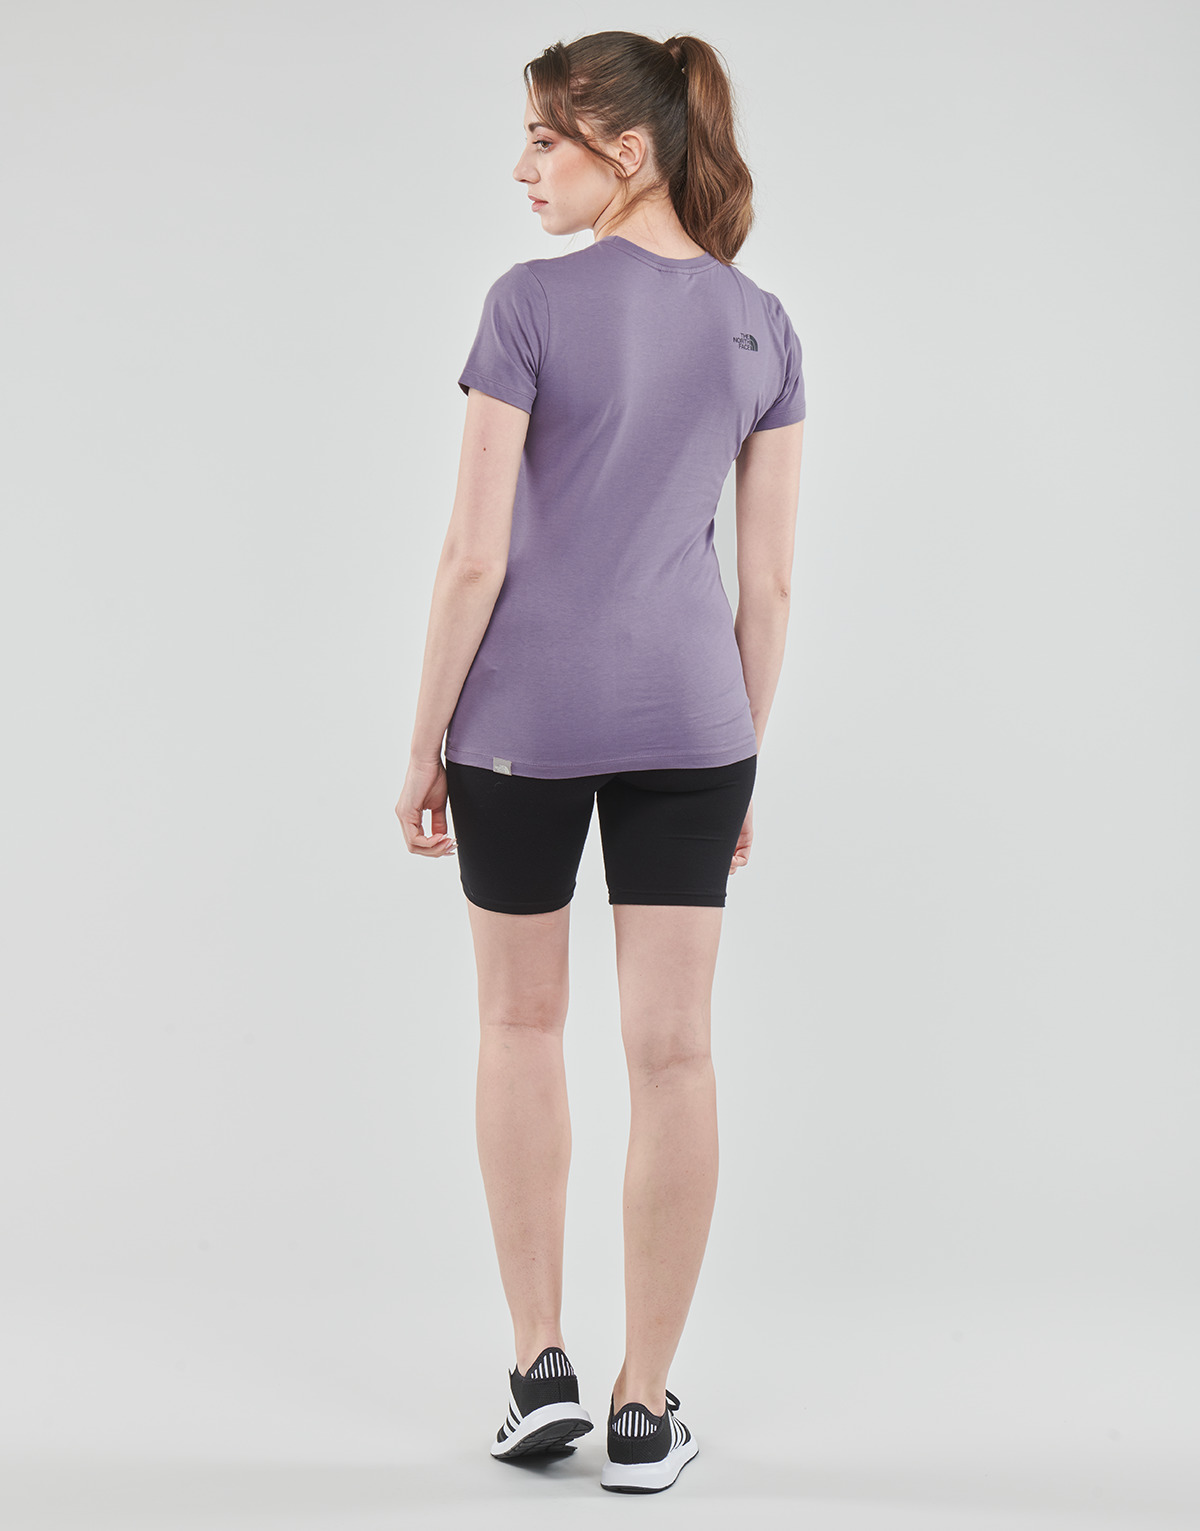 The North Face Violet S/S EASY TEE uk4vlBz3